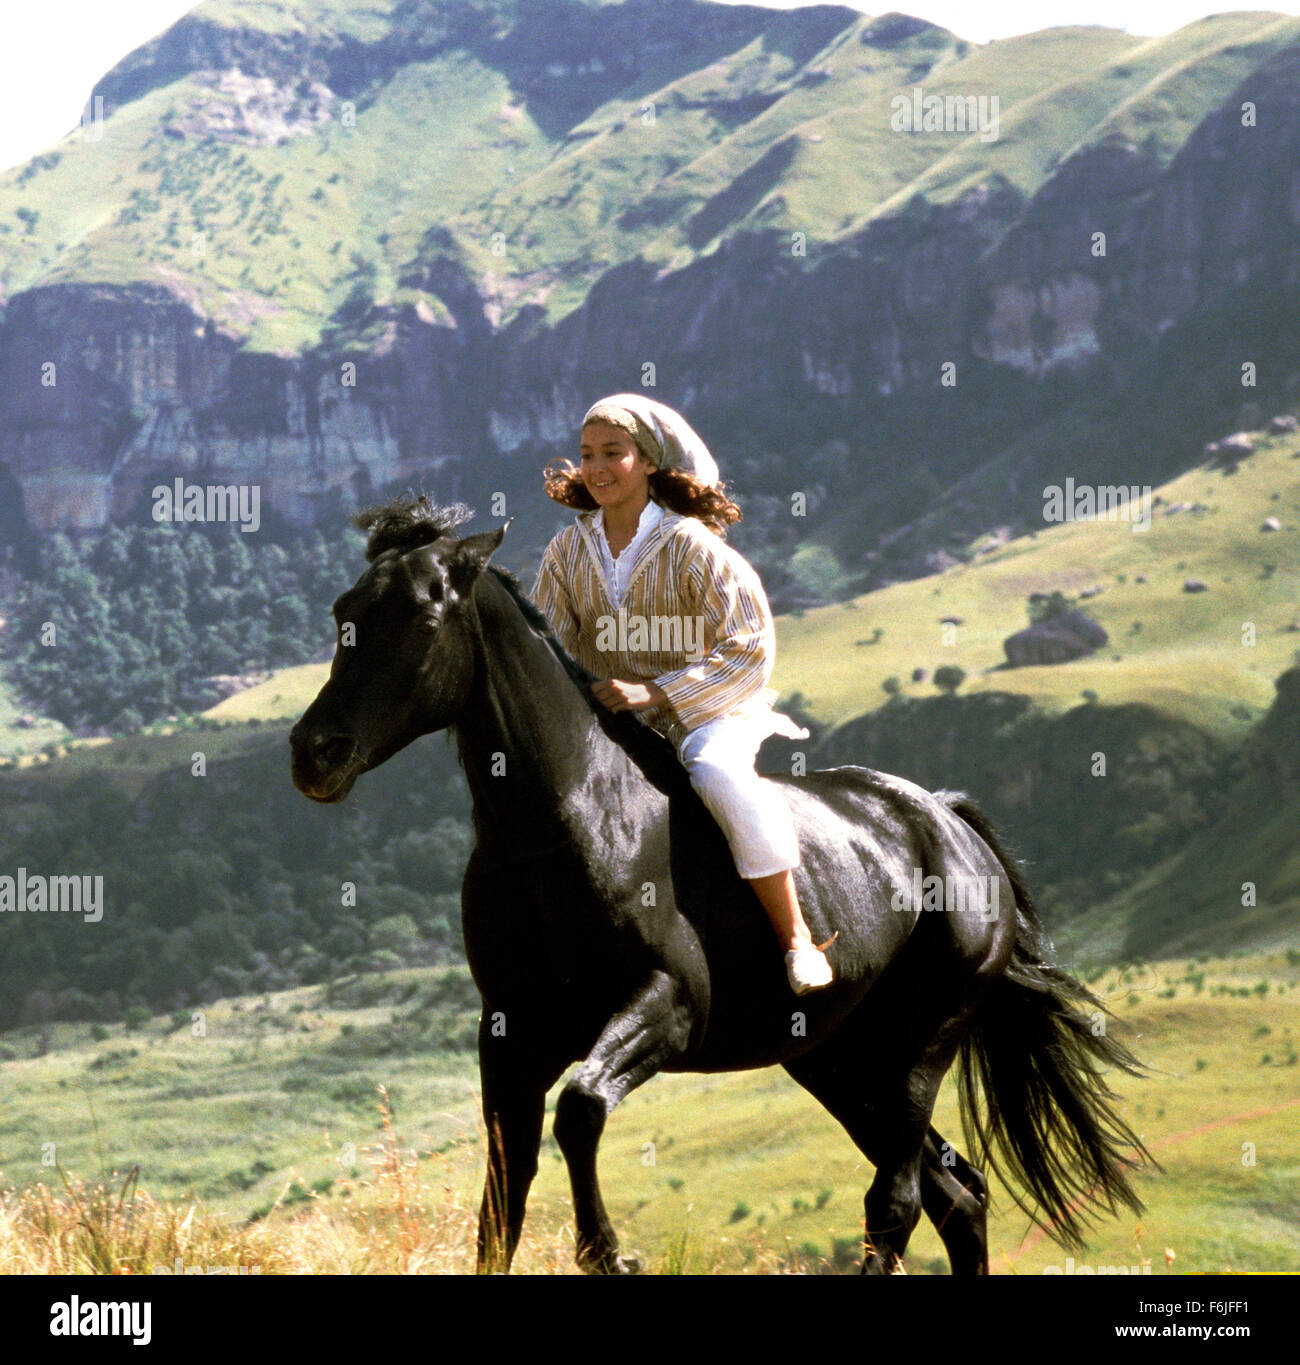 Dec 07, 2003; Hollywood, CA, USA; Actress BIANA TAMIMI stars as Neera in the Walt Disney Pictures family adventure, 'The Young Black Stallion.' Directed by Simon Wincer. Mandatory Credit: Photo by Walt Disney Pictures. (Ac) Copyright 2003 by Courtesy of Walt Disney Pictures Stock Photo